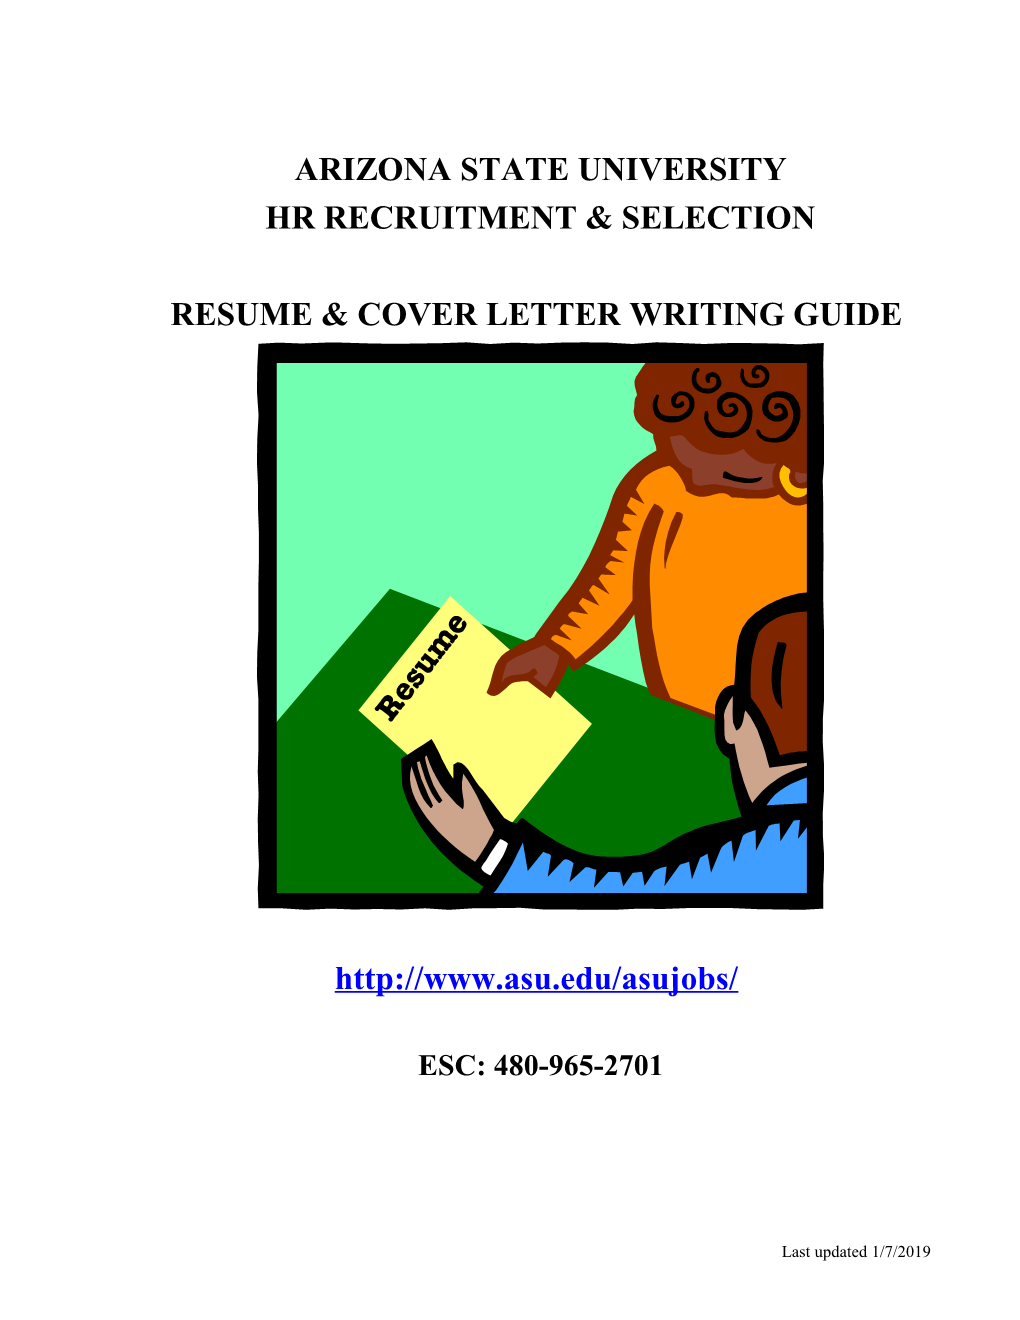 Resume & Cover Letter Writing Guide